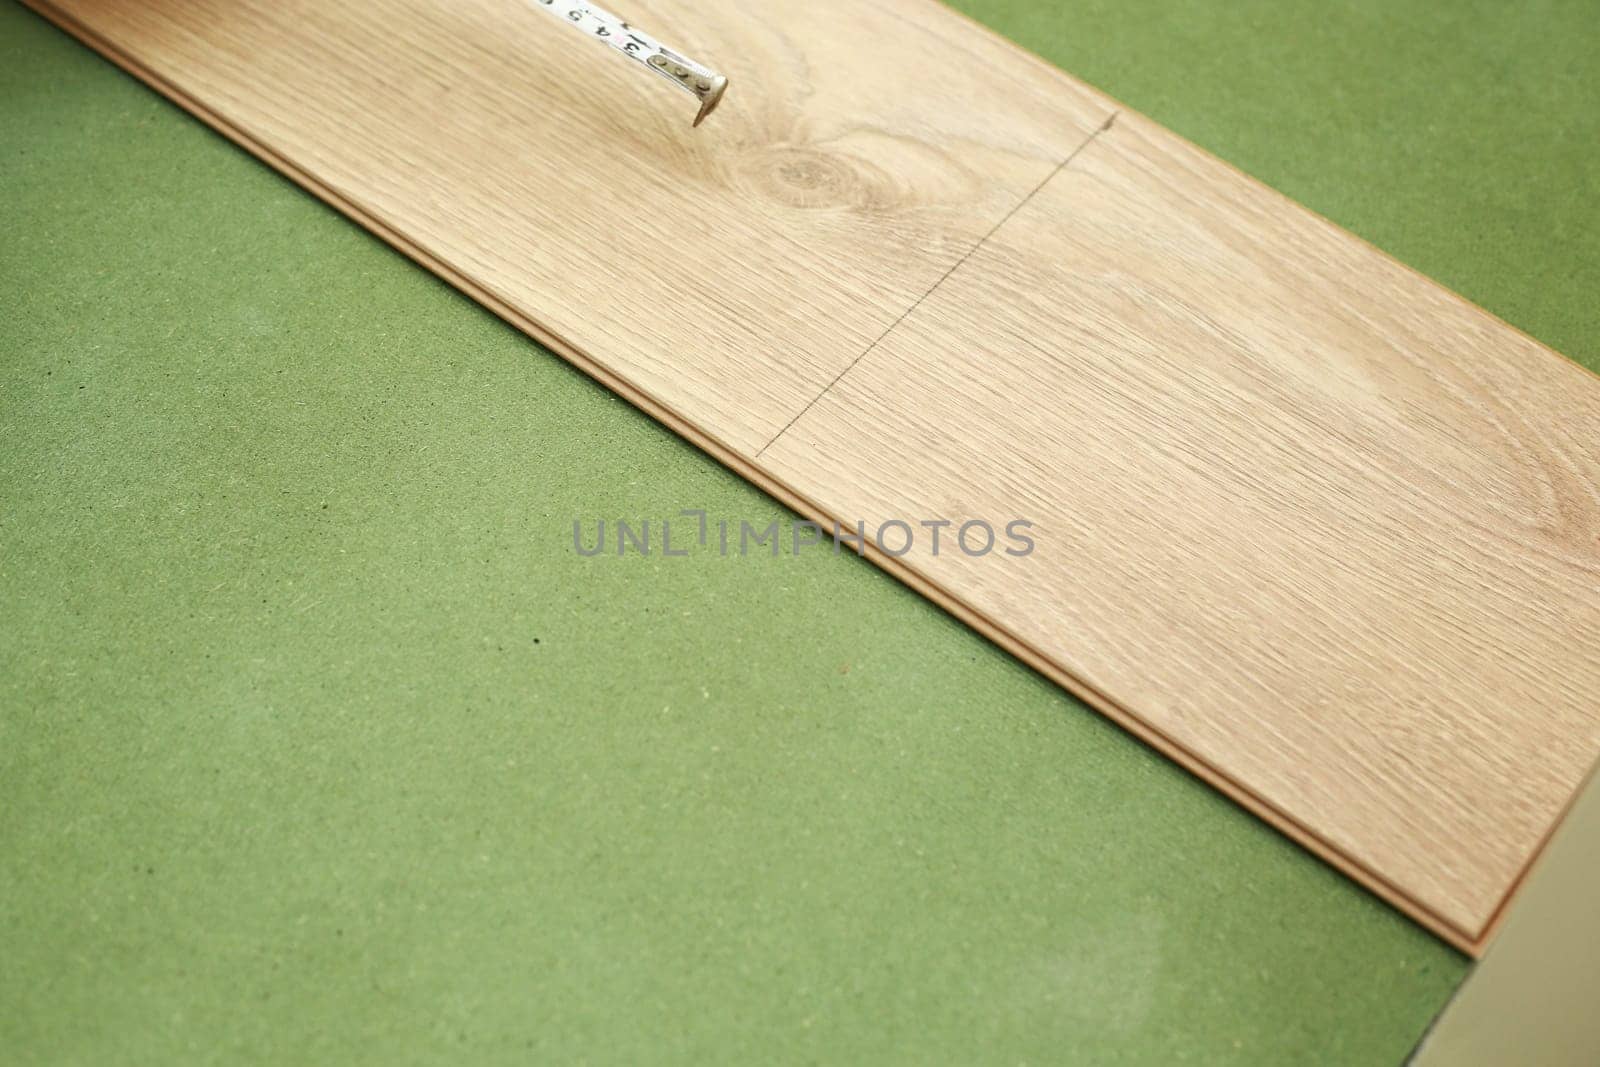 Installation laminate or parquet in the room, worker installing wooden laminate flooring, marking the length of the laminate. laying laminate flooring at home. measuring with a tape measure.